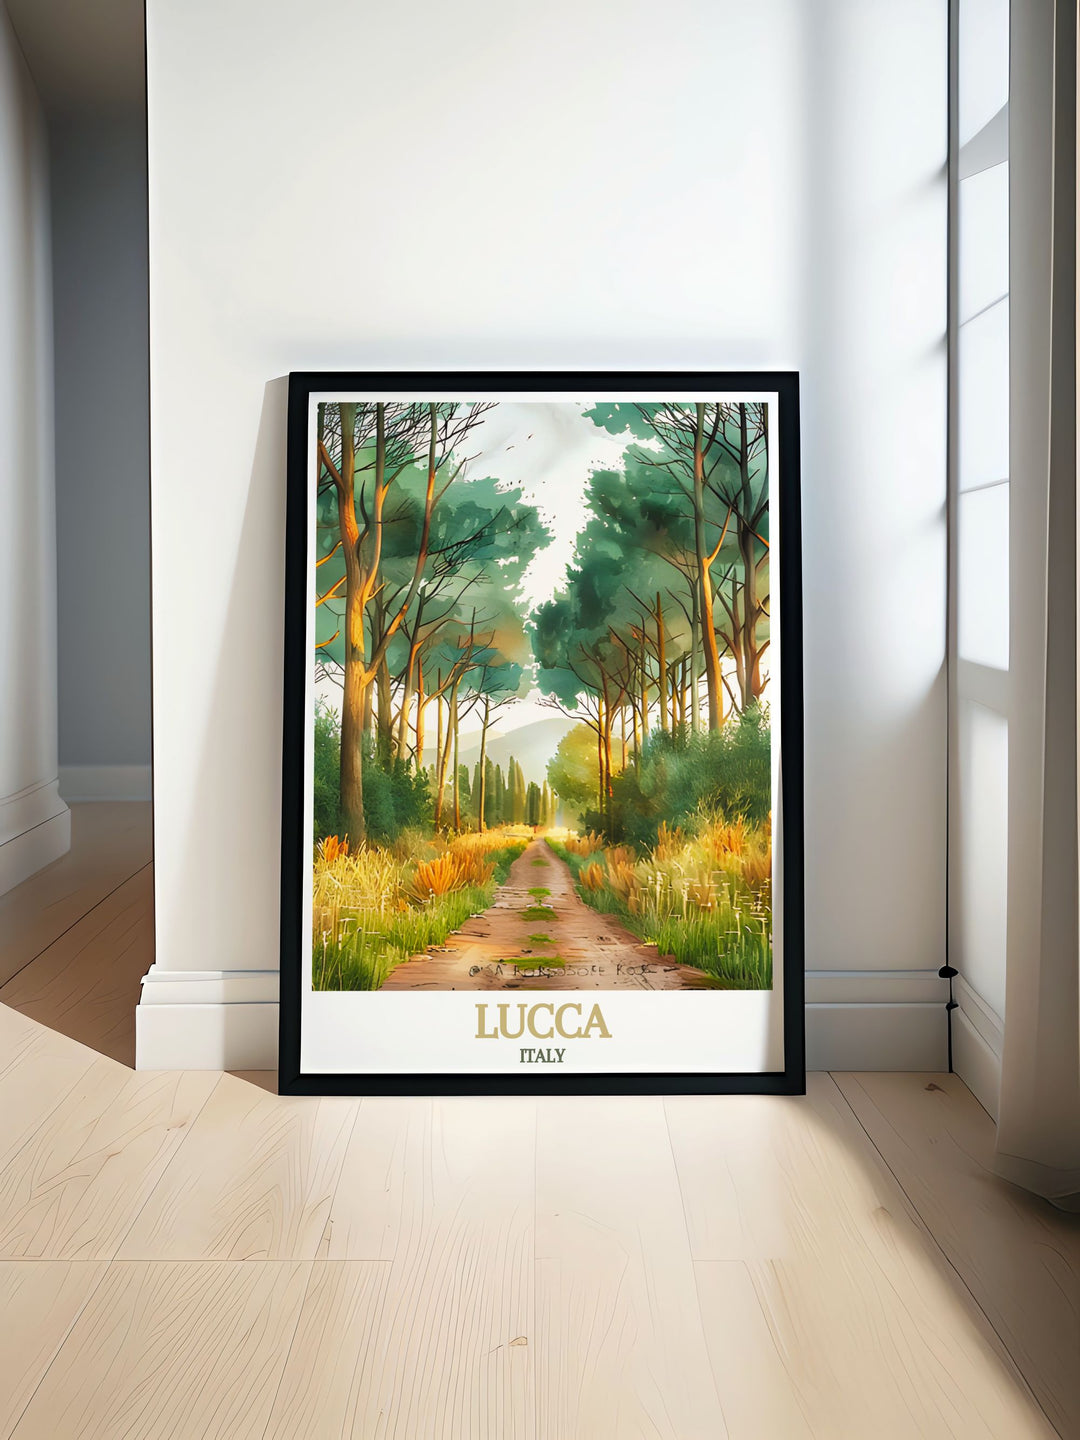 Lucca Wall Art showcasing vibrant city streets and detailed fine line prints alongside San Rossore Park modern prints perfect for adding a touch of elegance to any living room or office decor